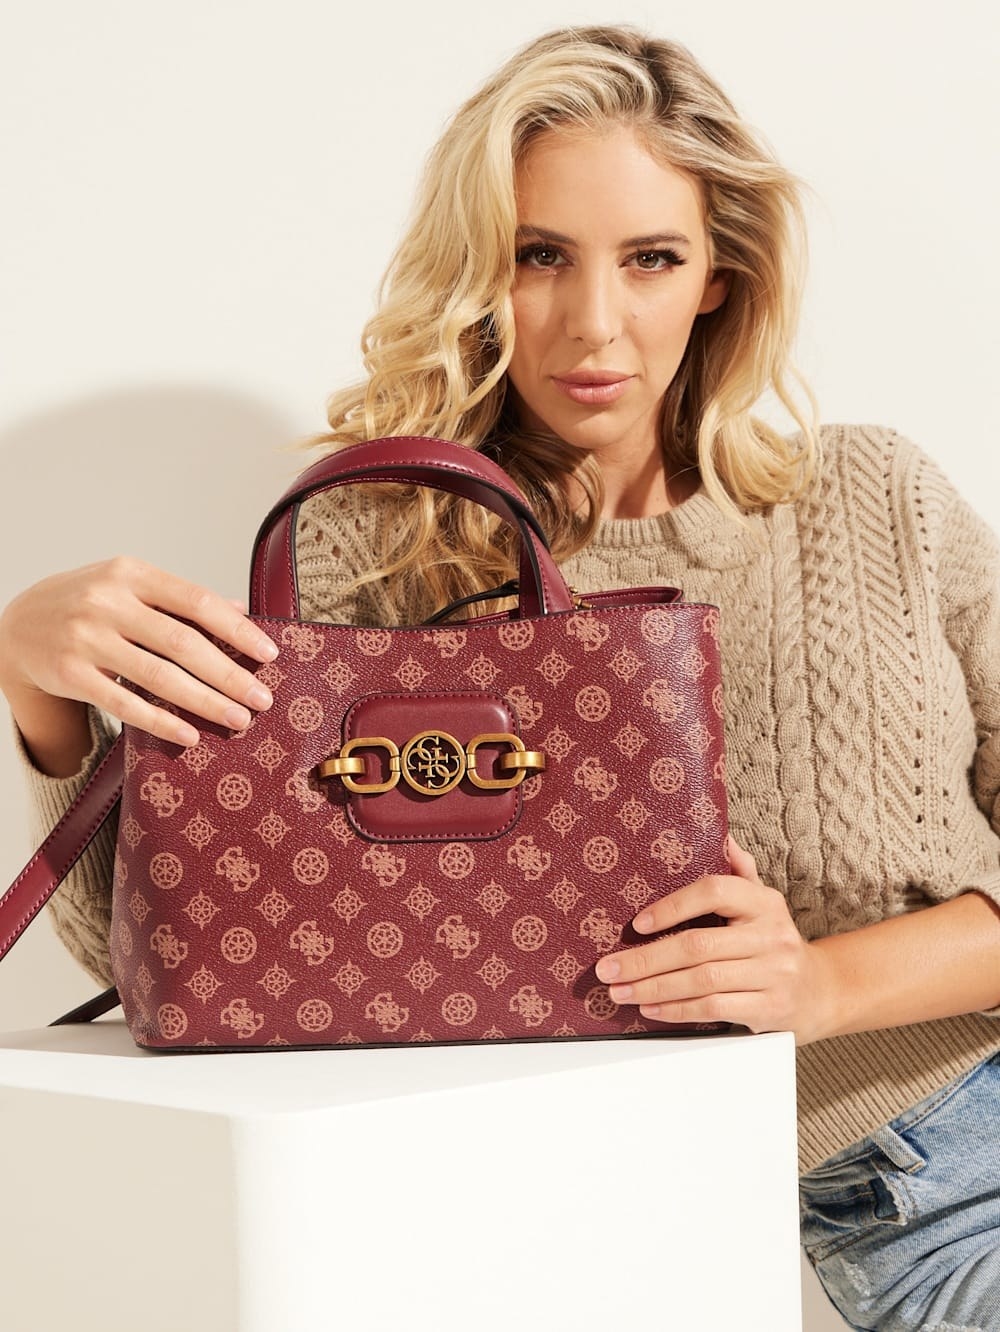 model holds red Guess logo satchel with gold buckle